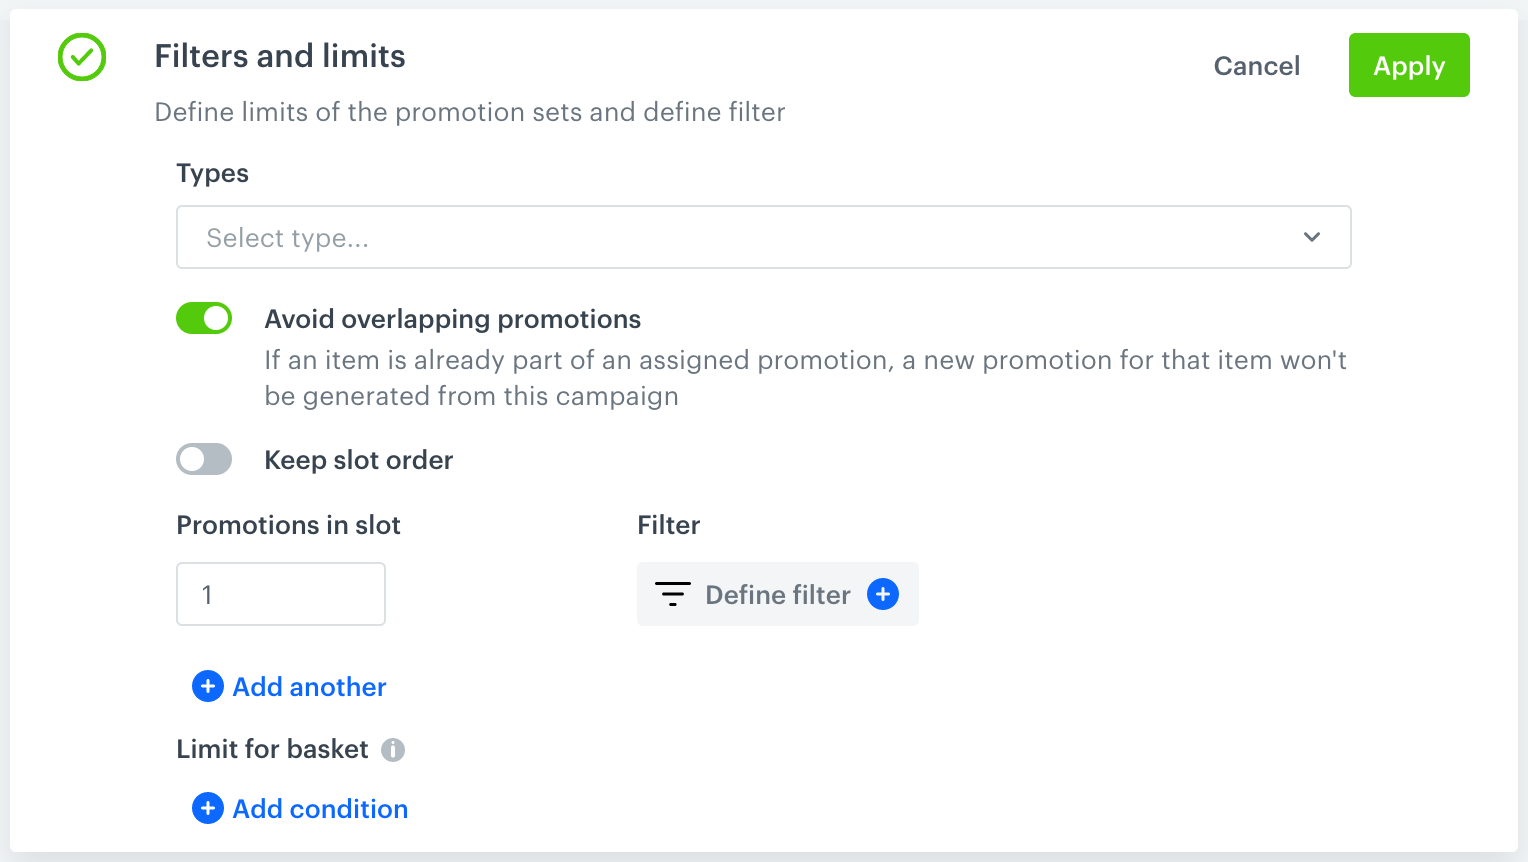 Filters and limits in the personalized promotions